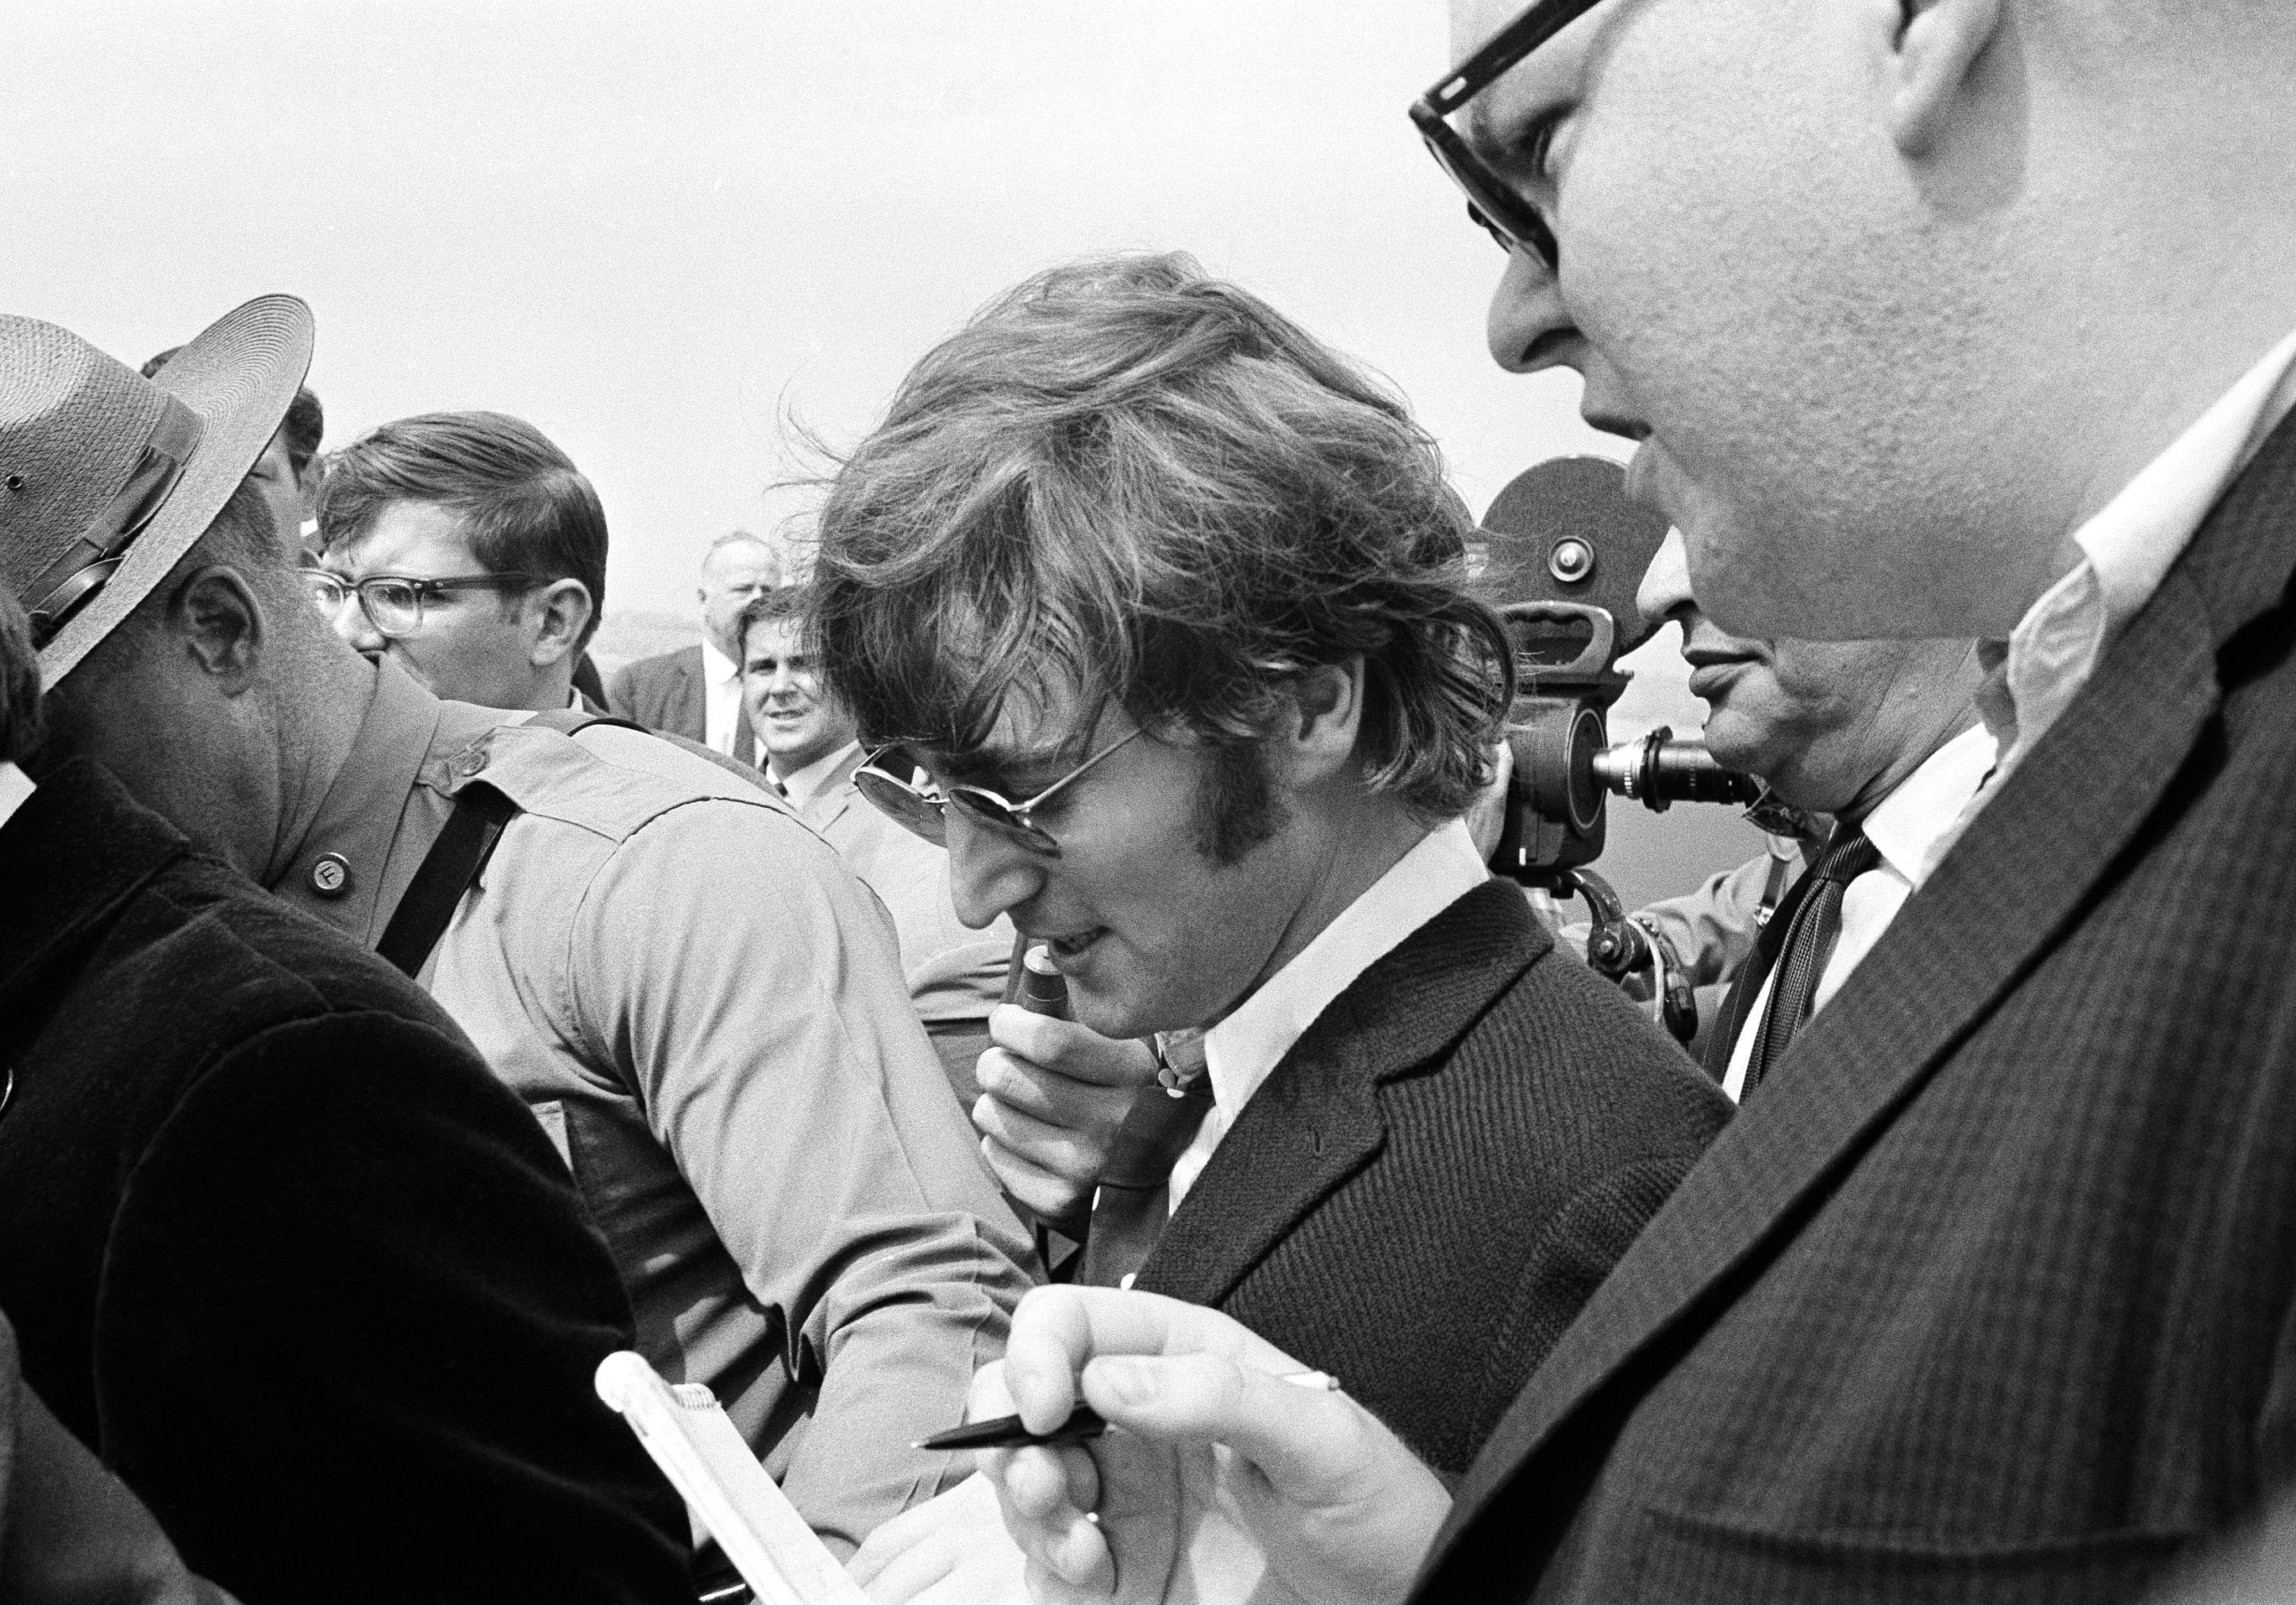 John Lennon is guided by a state trooper past journalists on arrival in Boston on August 11, 1966 for a US tour, amid a furore after he said the Beatles were more popular than Jesus